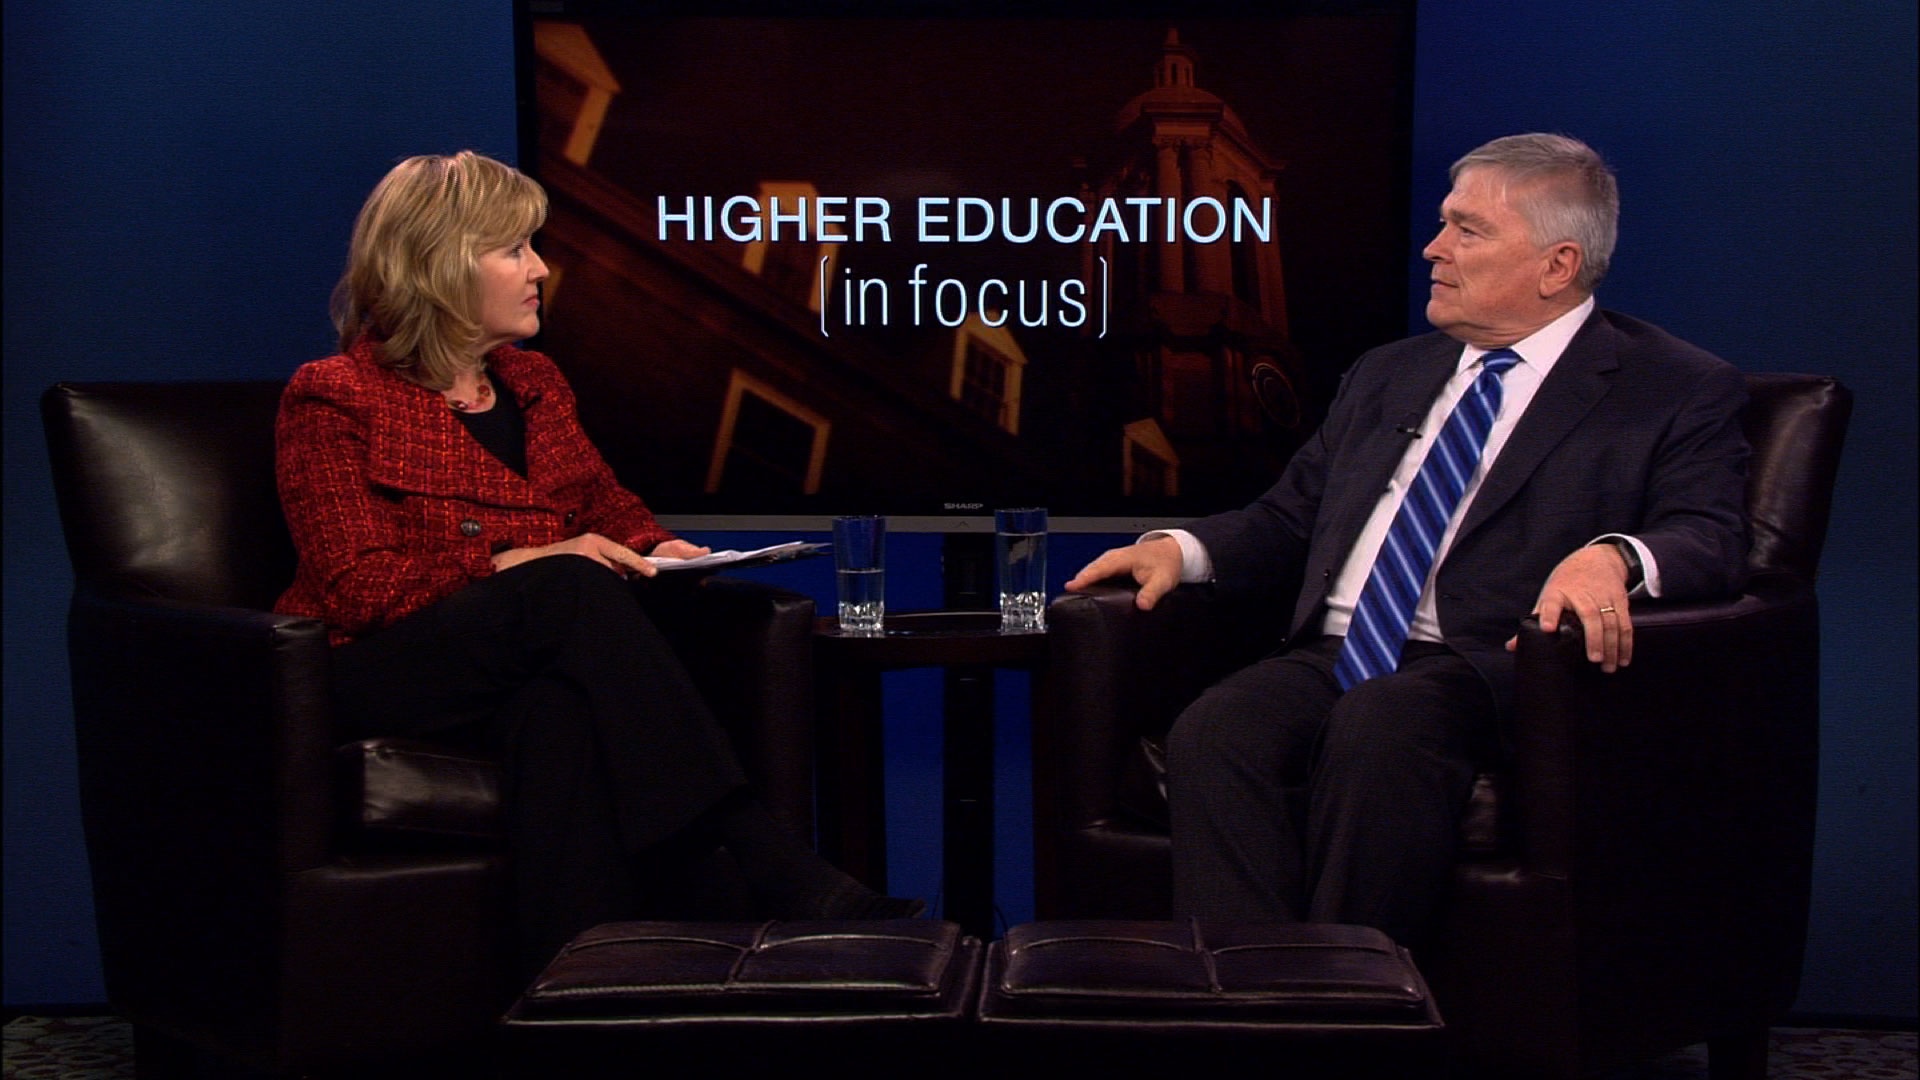 Patty Satalia and Eric Barron on the set of Higher Education in Focus